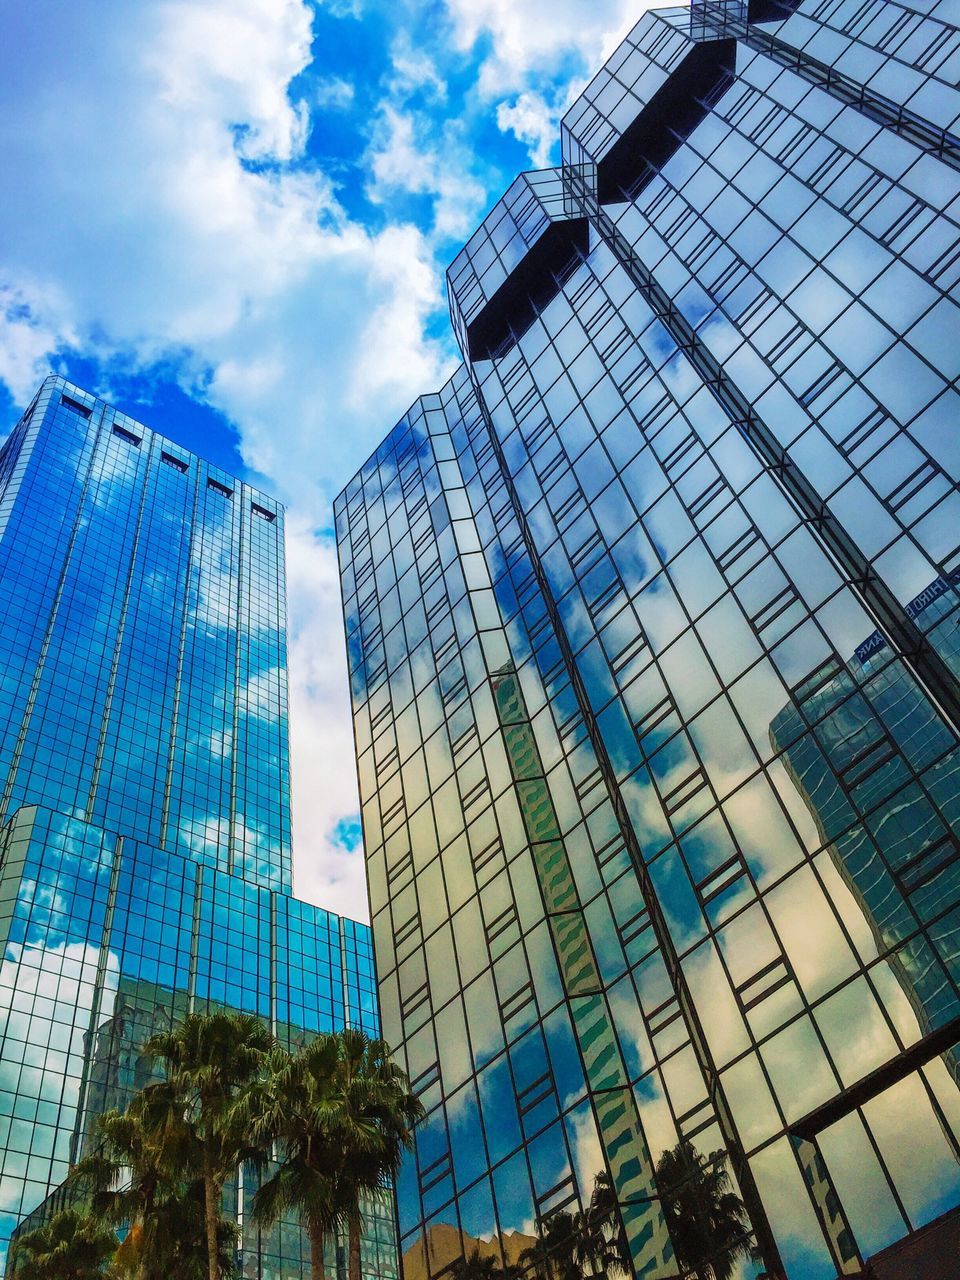 building exterior, architecture, low angle view, built structure, modern, office building, skyscraper, tall - high, glass - material, city, reflection, tower, sky, building, cloud - sky, blue, day, cloud, tall, window